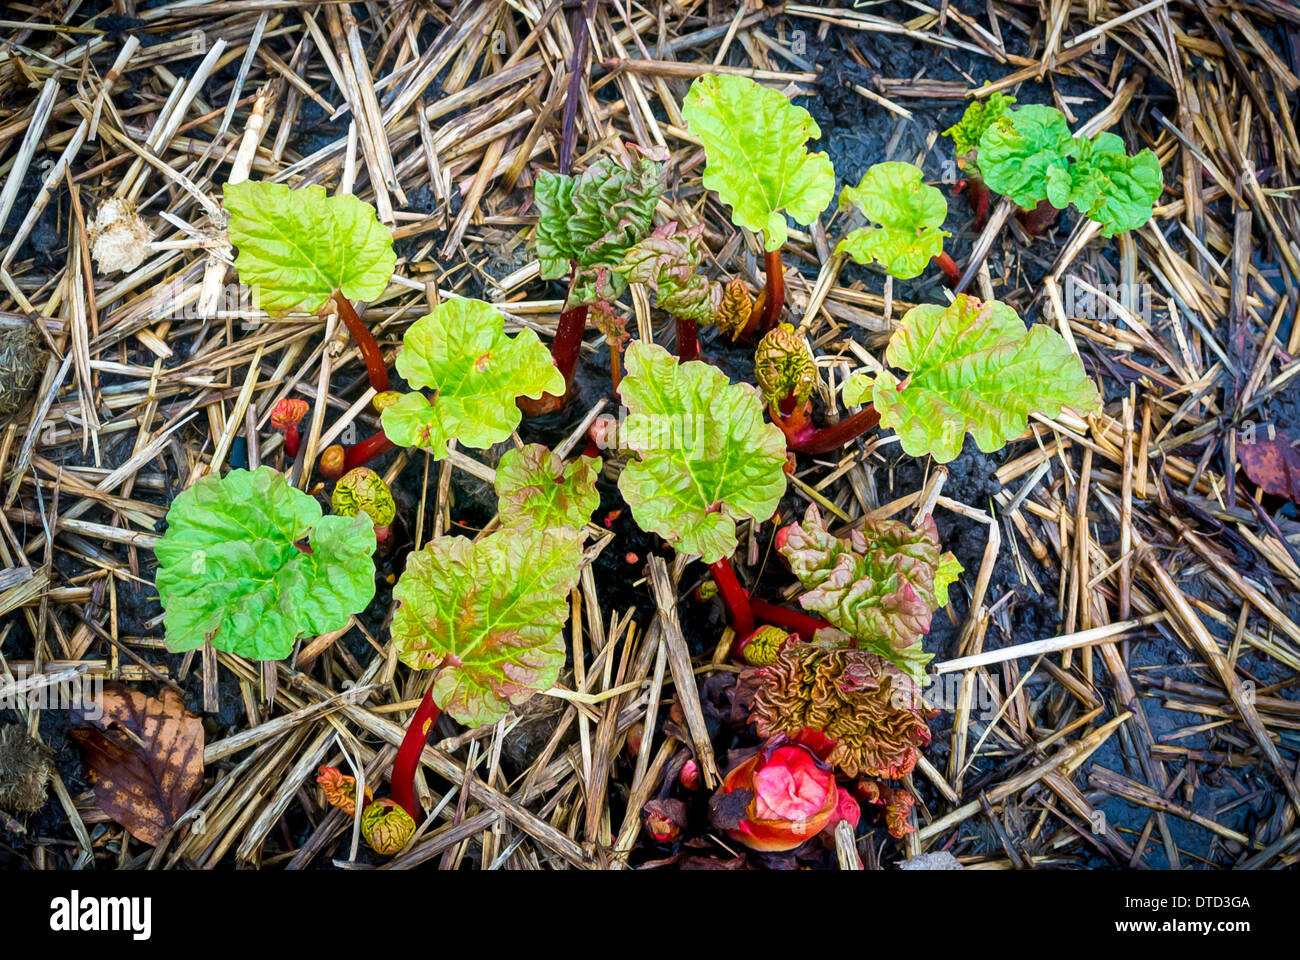 New rhubarb plant shoots emerging from ground Stock Photo